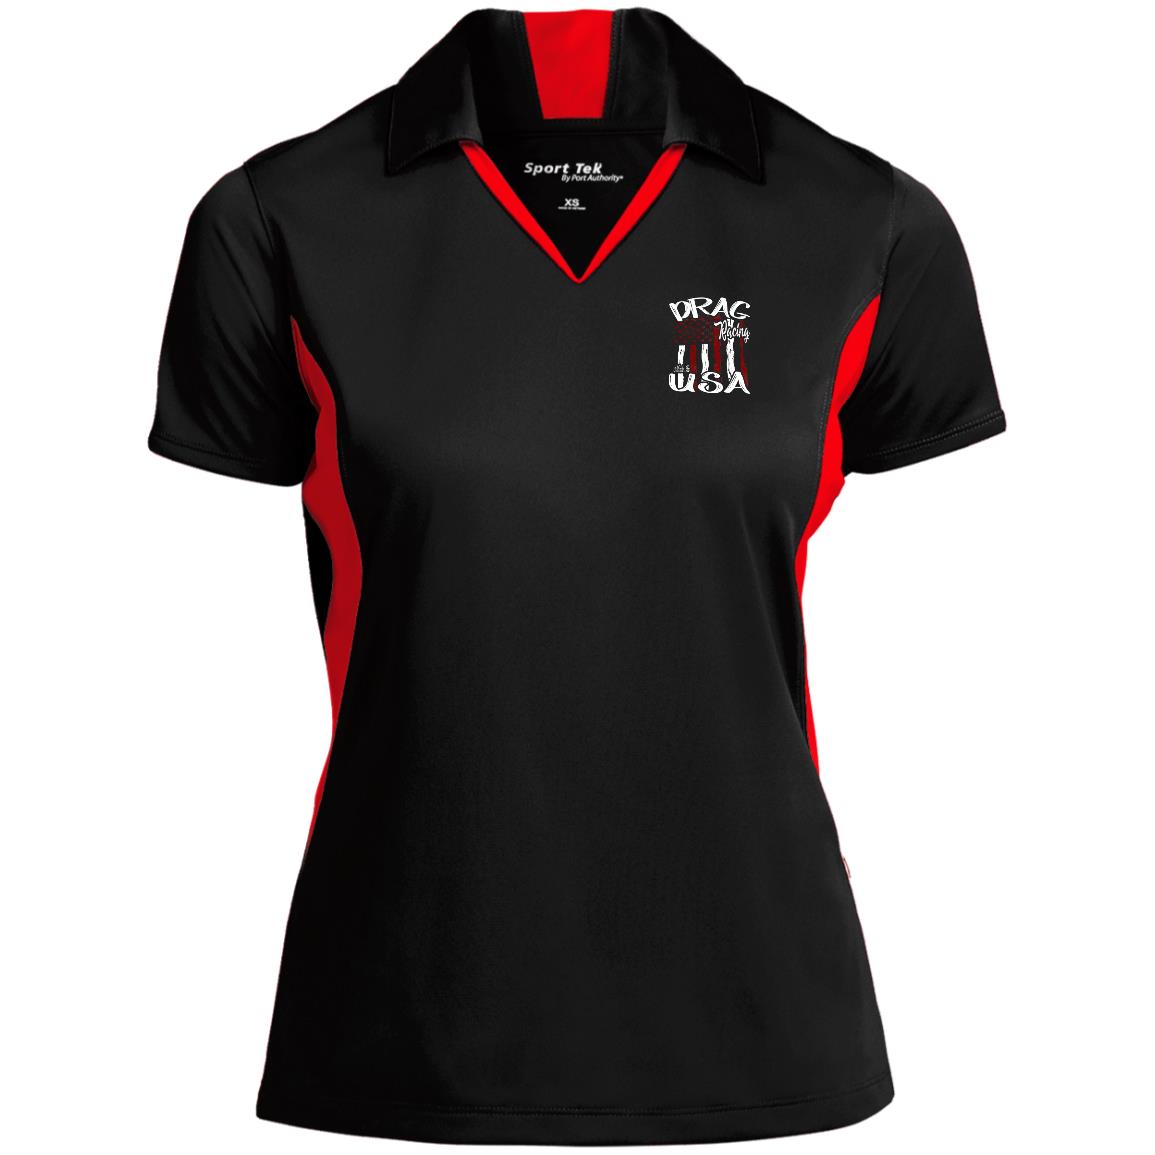 Drag Racing Made In USA Ladies' Colorblock Performance Polo